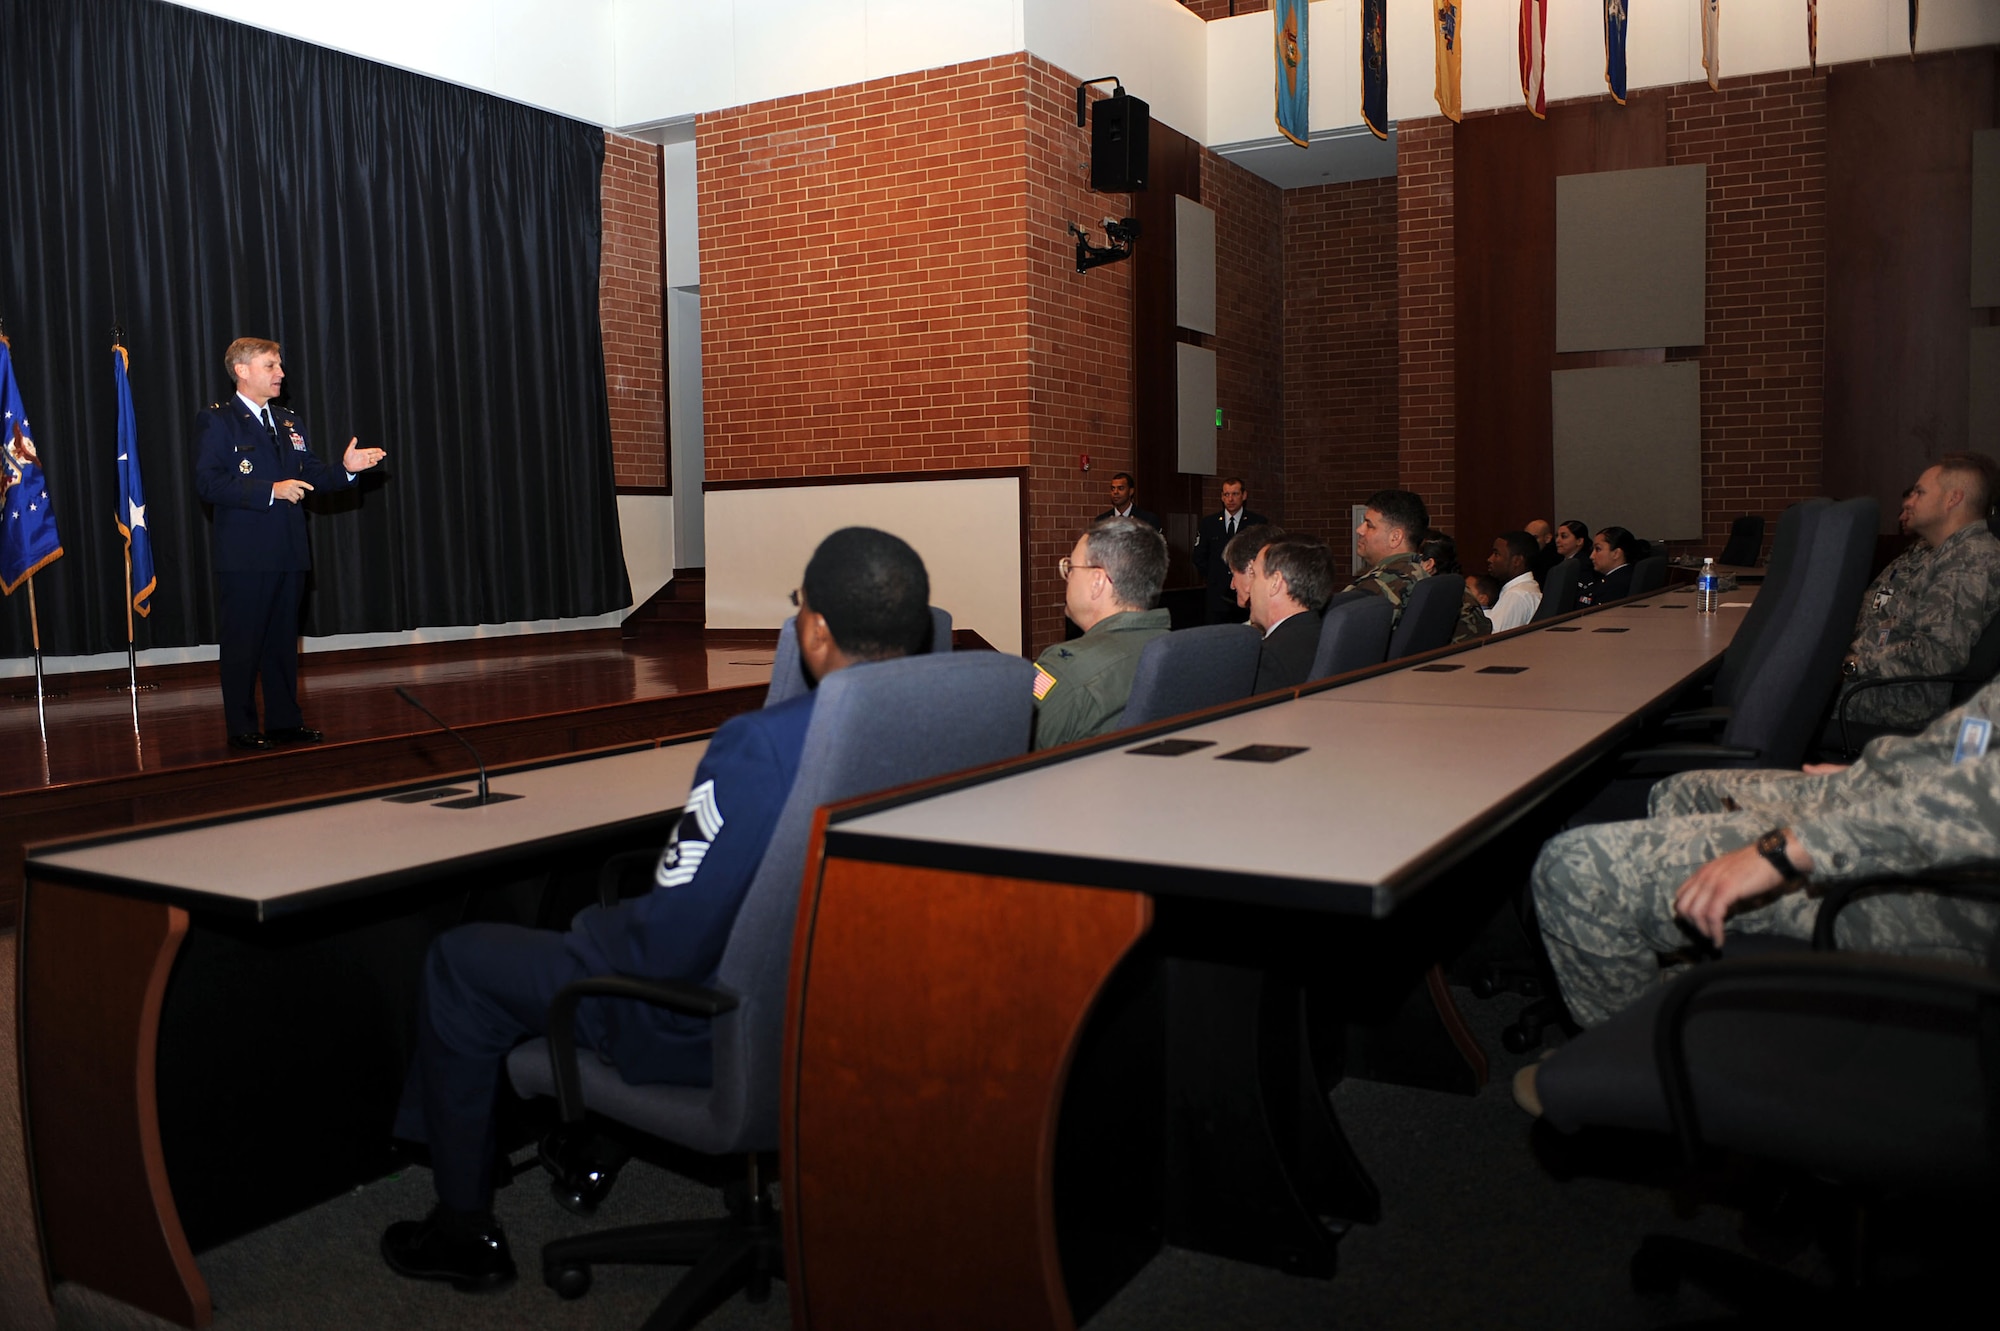 Maj. Gen. Kip Self, U.S. Air Force Expeditionary Center commander, addresses the EC "Eagles" on Wingman Day activities prior to the start of a promotion ceremony Nov. 26, 2008, in the Center's Grace Peterson Hall.  All members of the Expeditionary Center gathered that day to celebrate and learn from their fellow wingmen.  (U.S. Air Force Photo/Staff Sgt. Nathan Bevier)